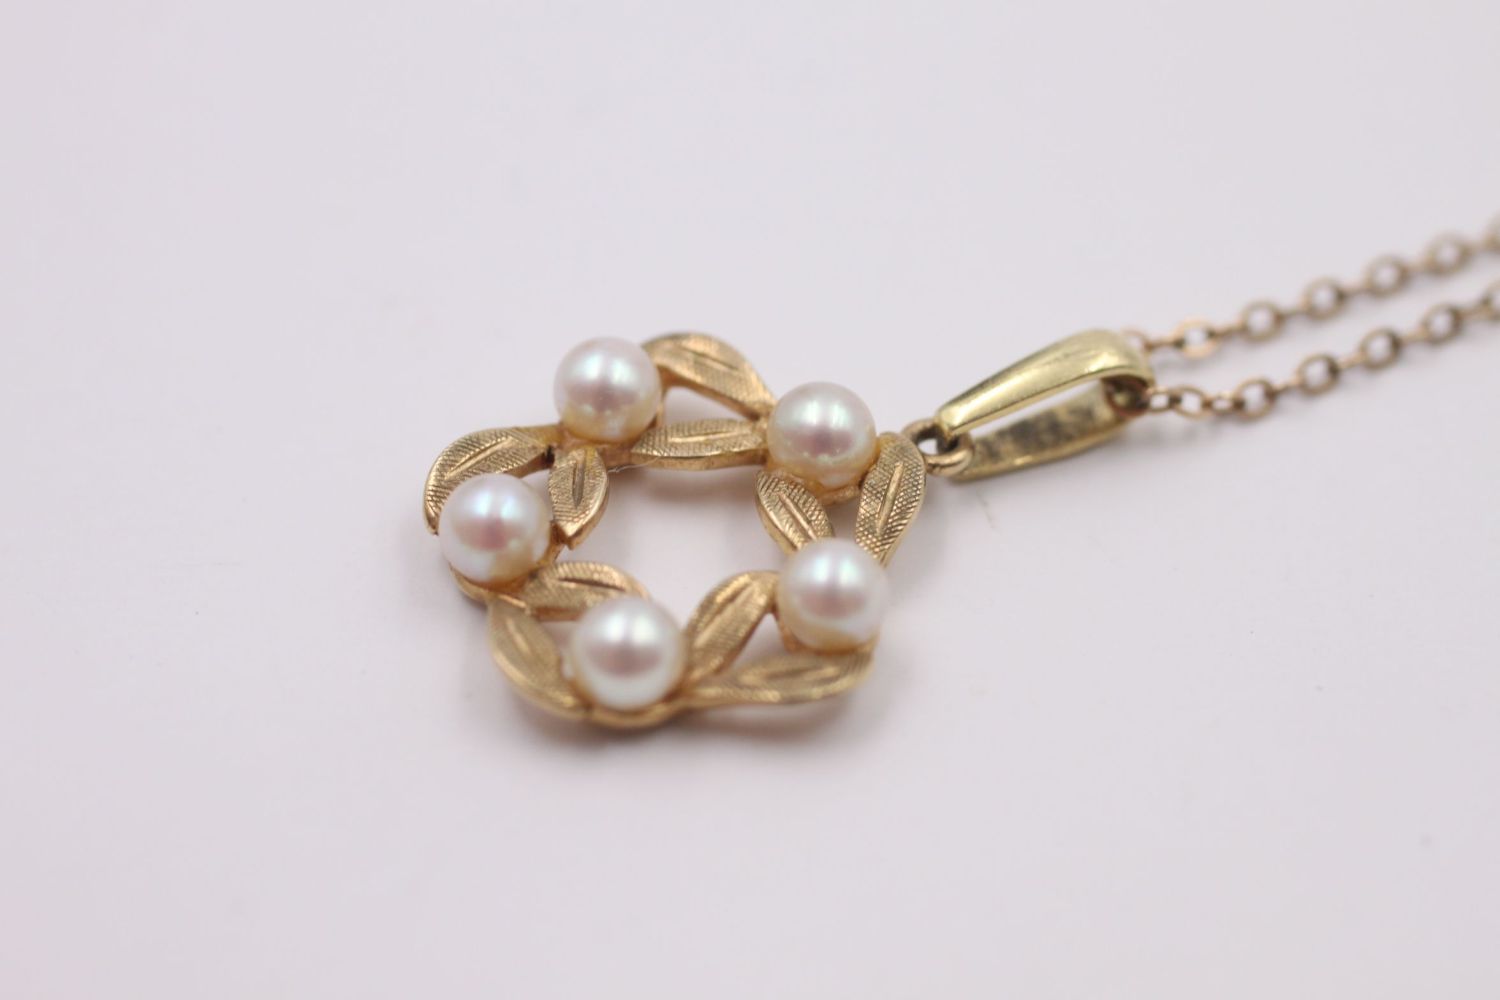 vintage 9ct gold pearl set pendant on chain 2.2 grams gross - Image 2 of 5